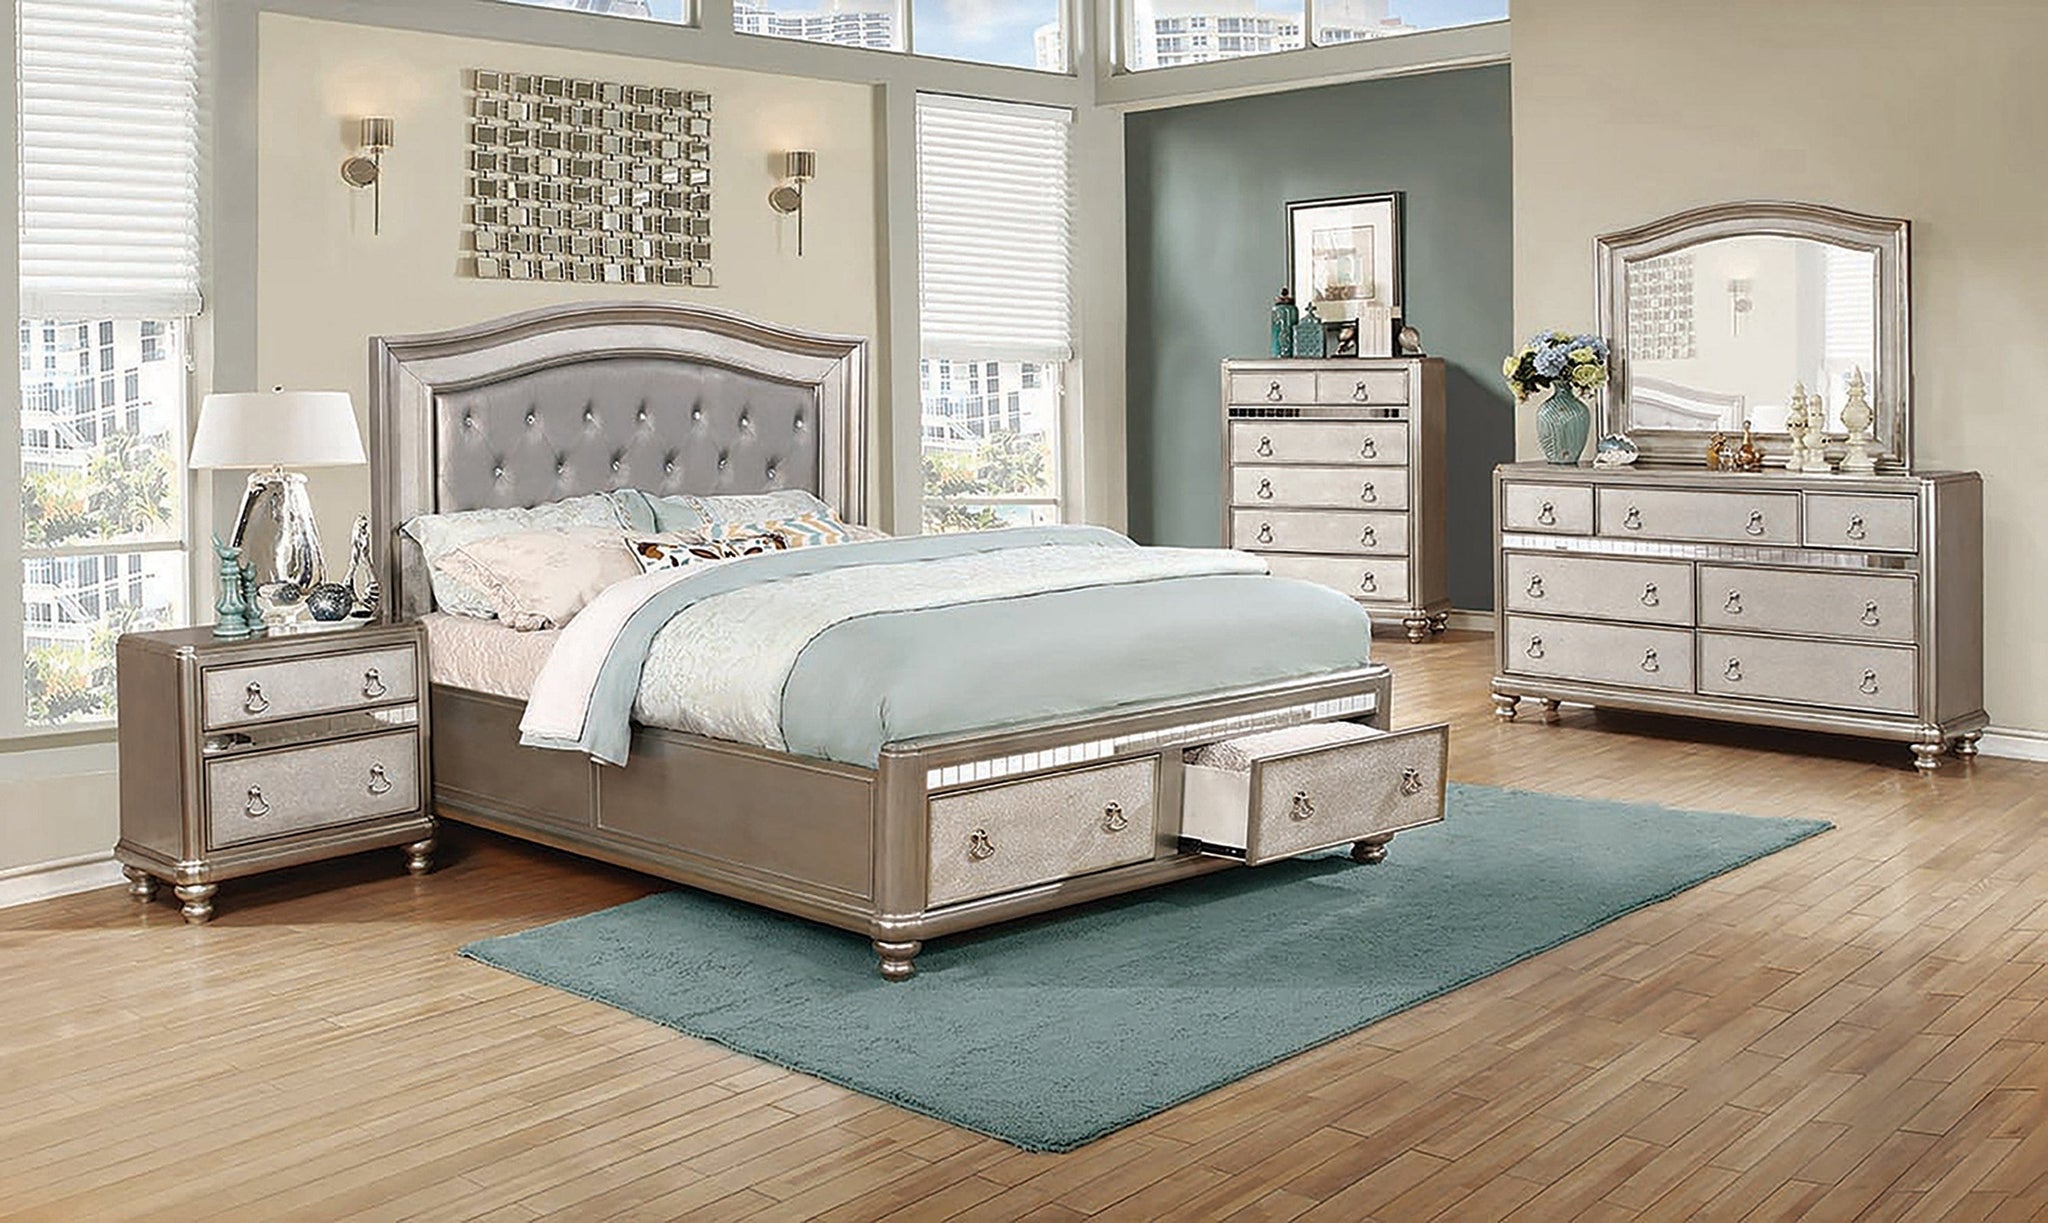 Bling Game Upholstered Storage Queen Bed Metallic Platinum Collection: Bling Game SKU: 204180Q